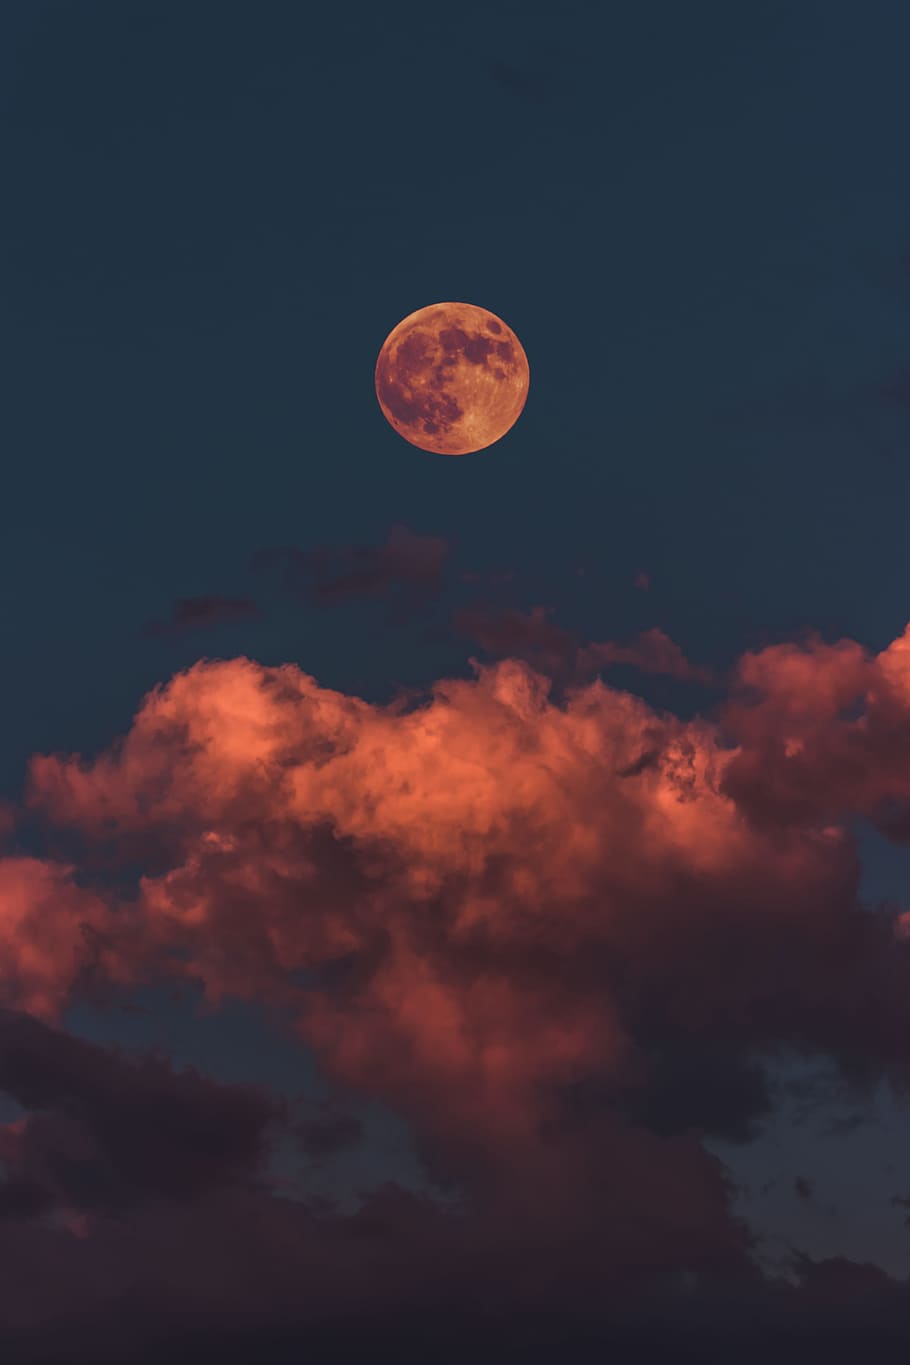 full moon and clouds, sky, blood moon, eclipse, lunar, astrophotography